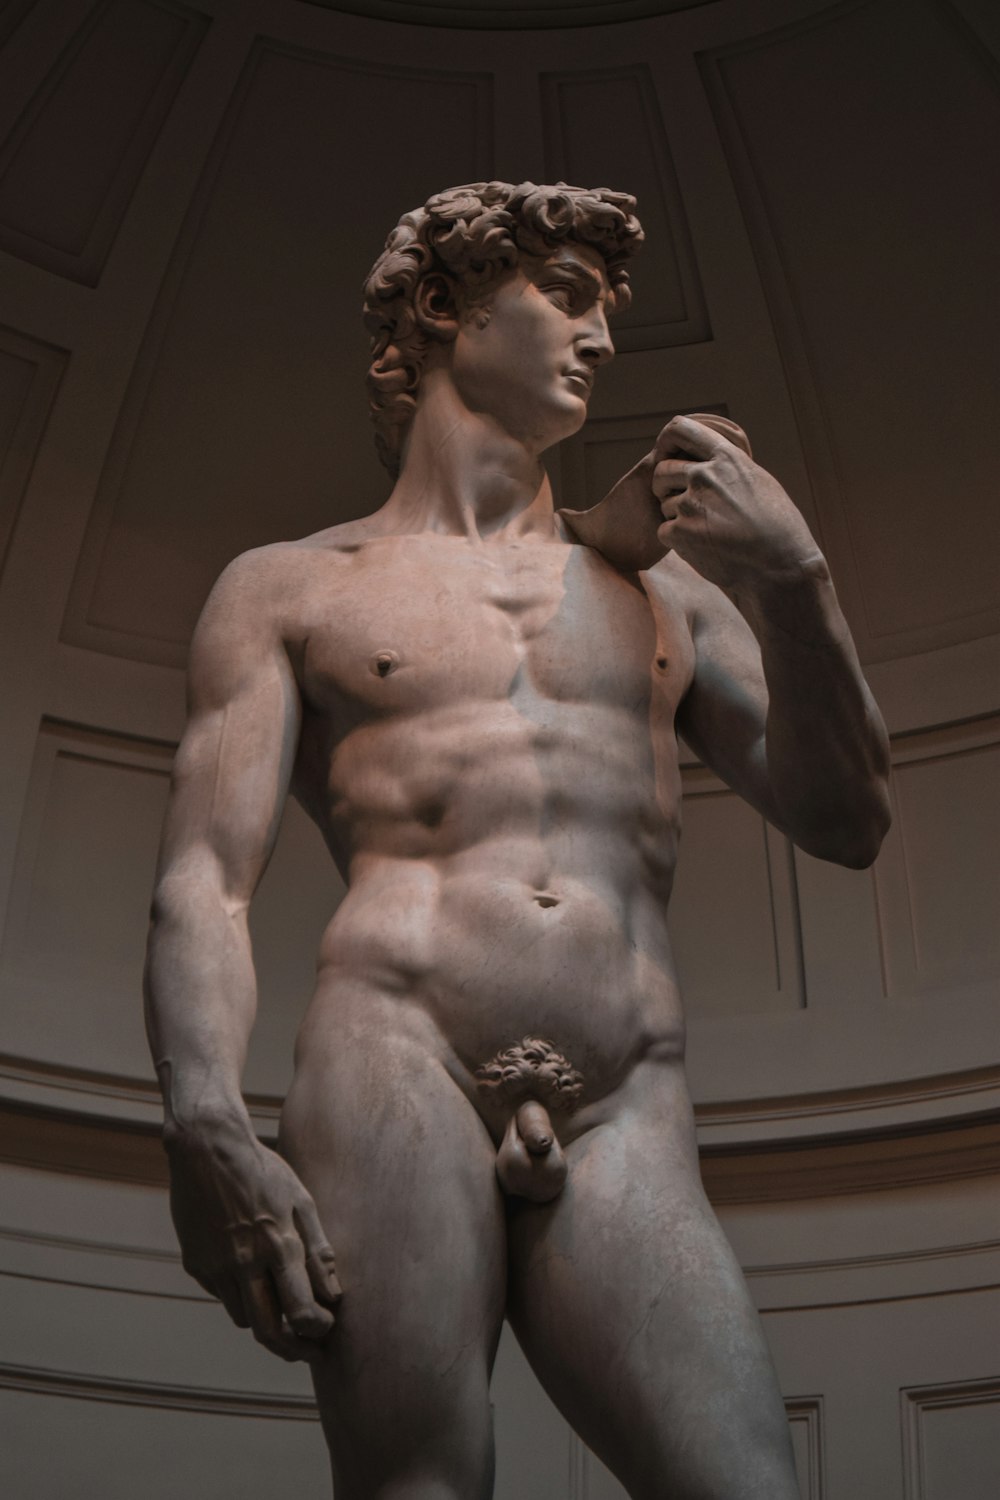 a statue of a man with no shirt on